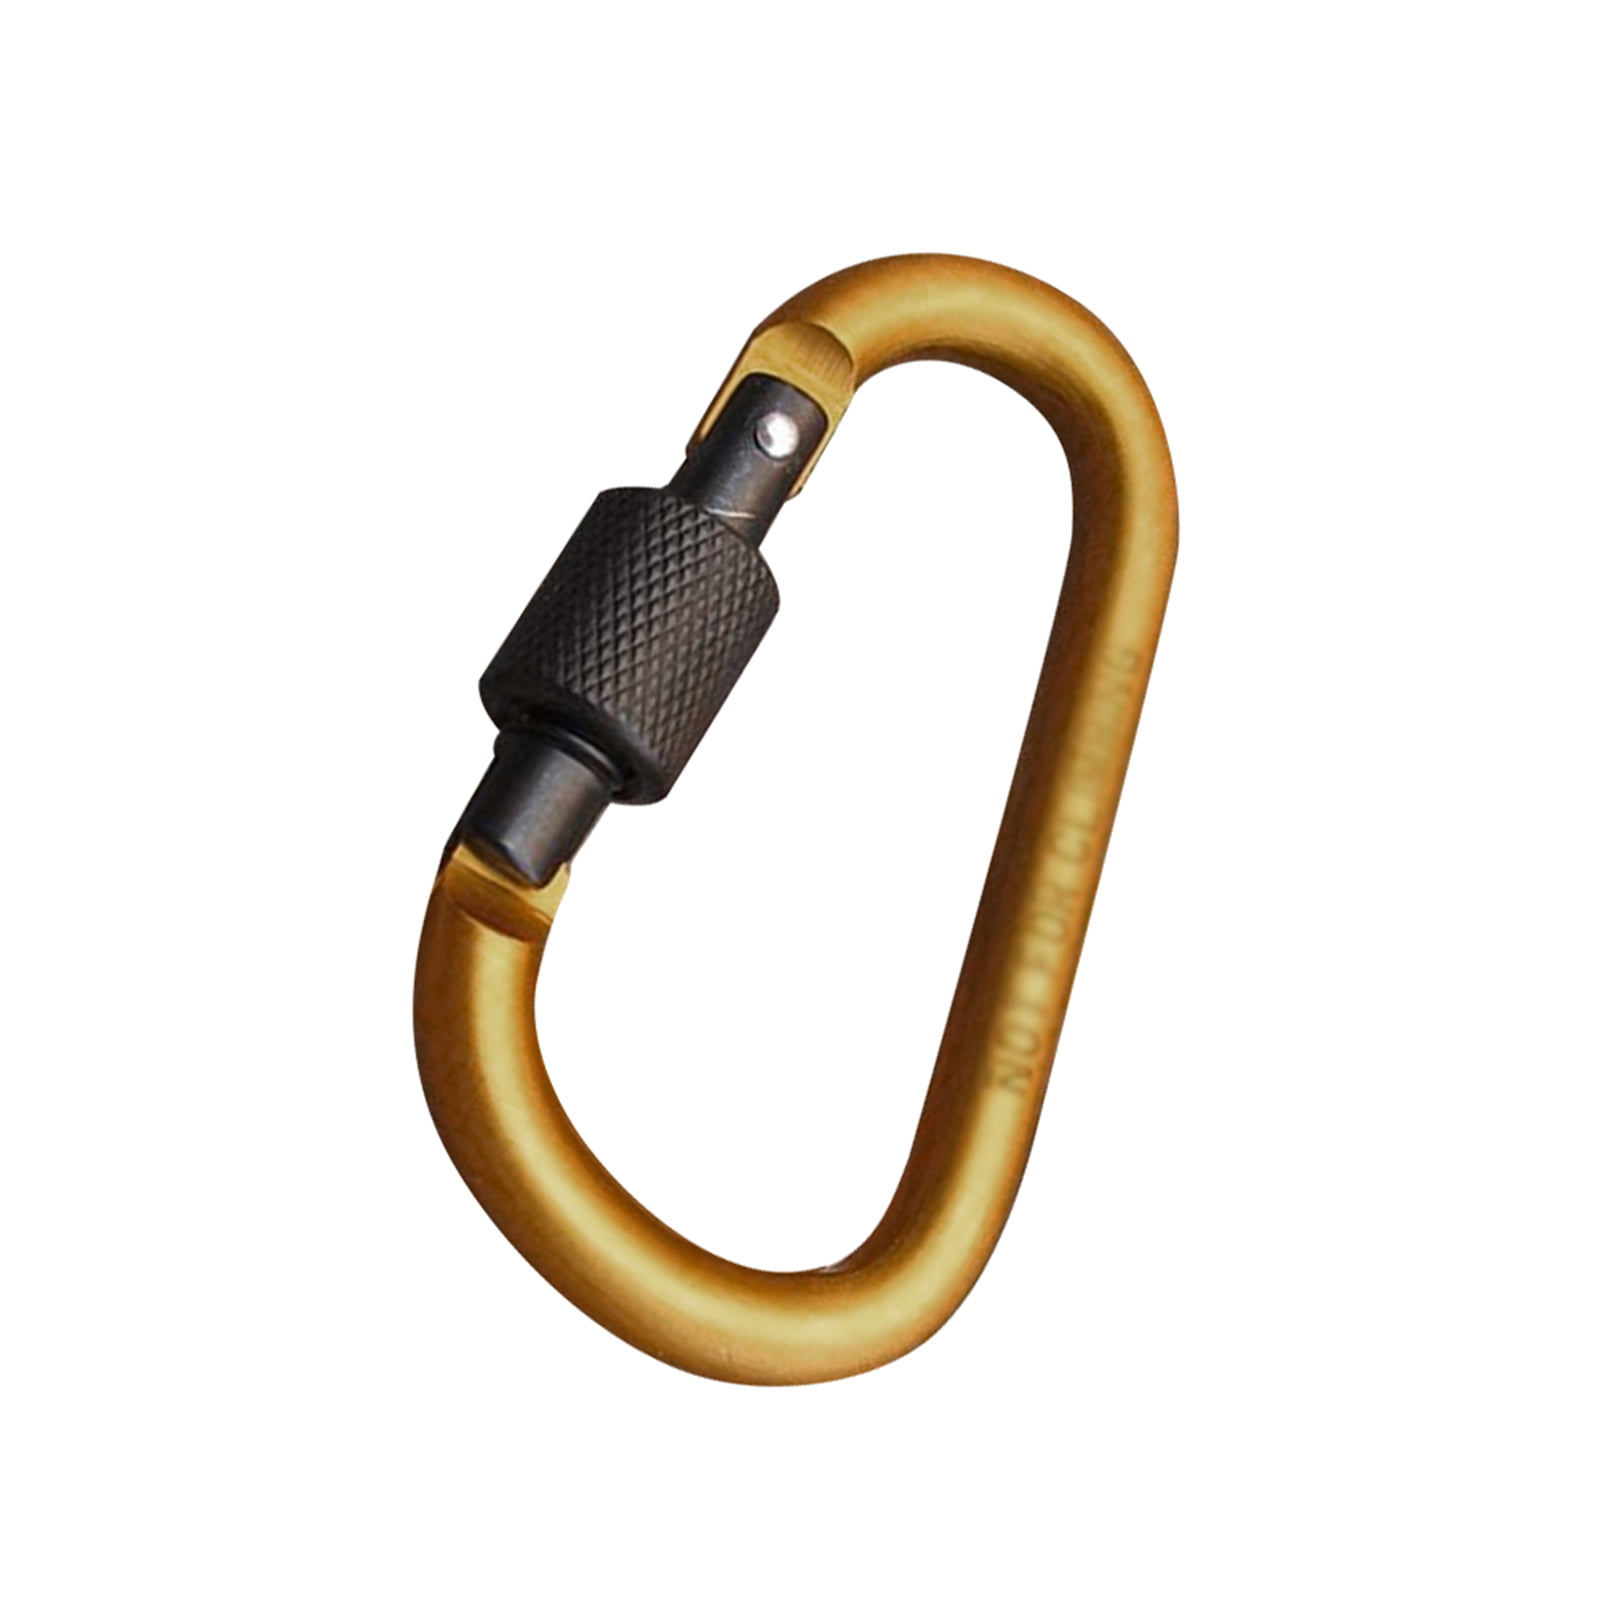 Details about   6pcs Outdoor Carabiner D-Ring Clip Hook Snap Spring Lock Key Chain Buckle Tools 